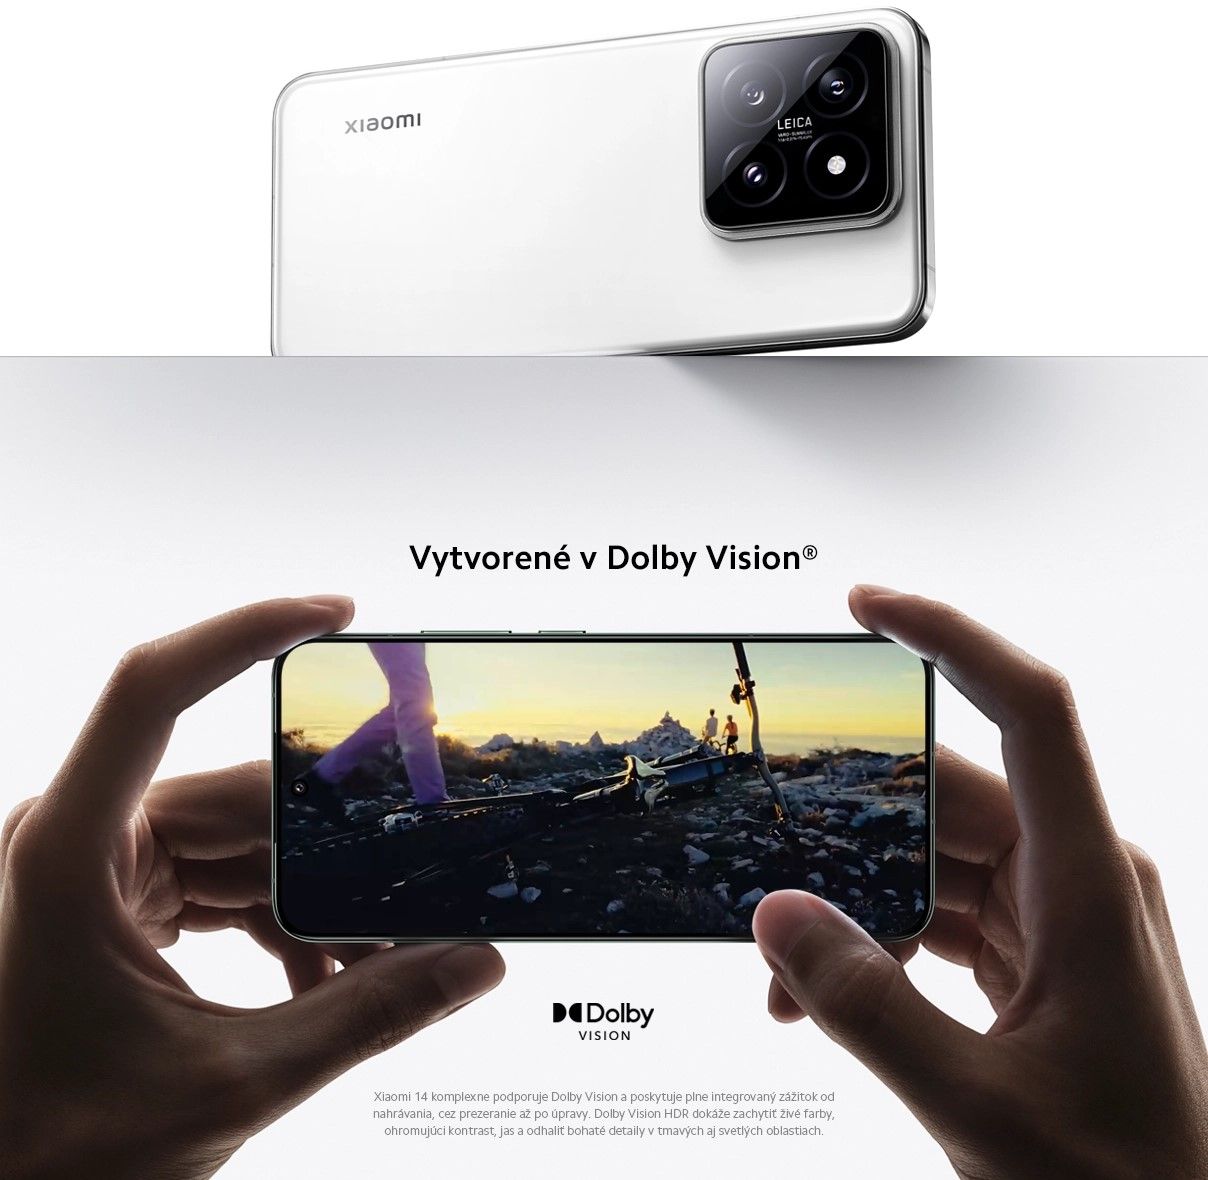 3_xiaomi_14_dolby_vision_1708776594